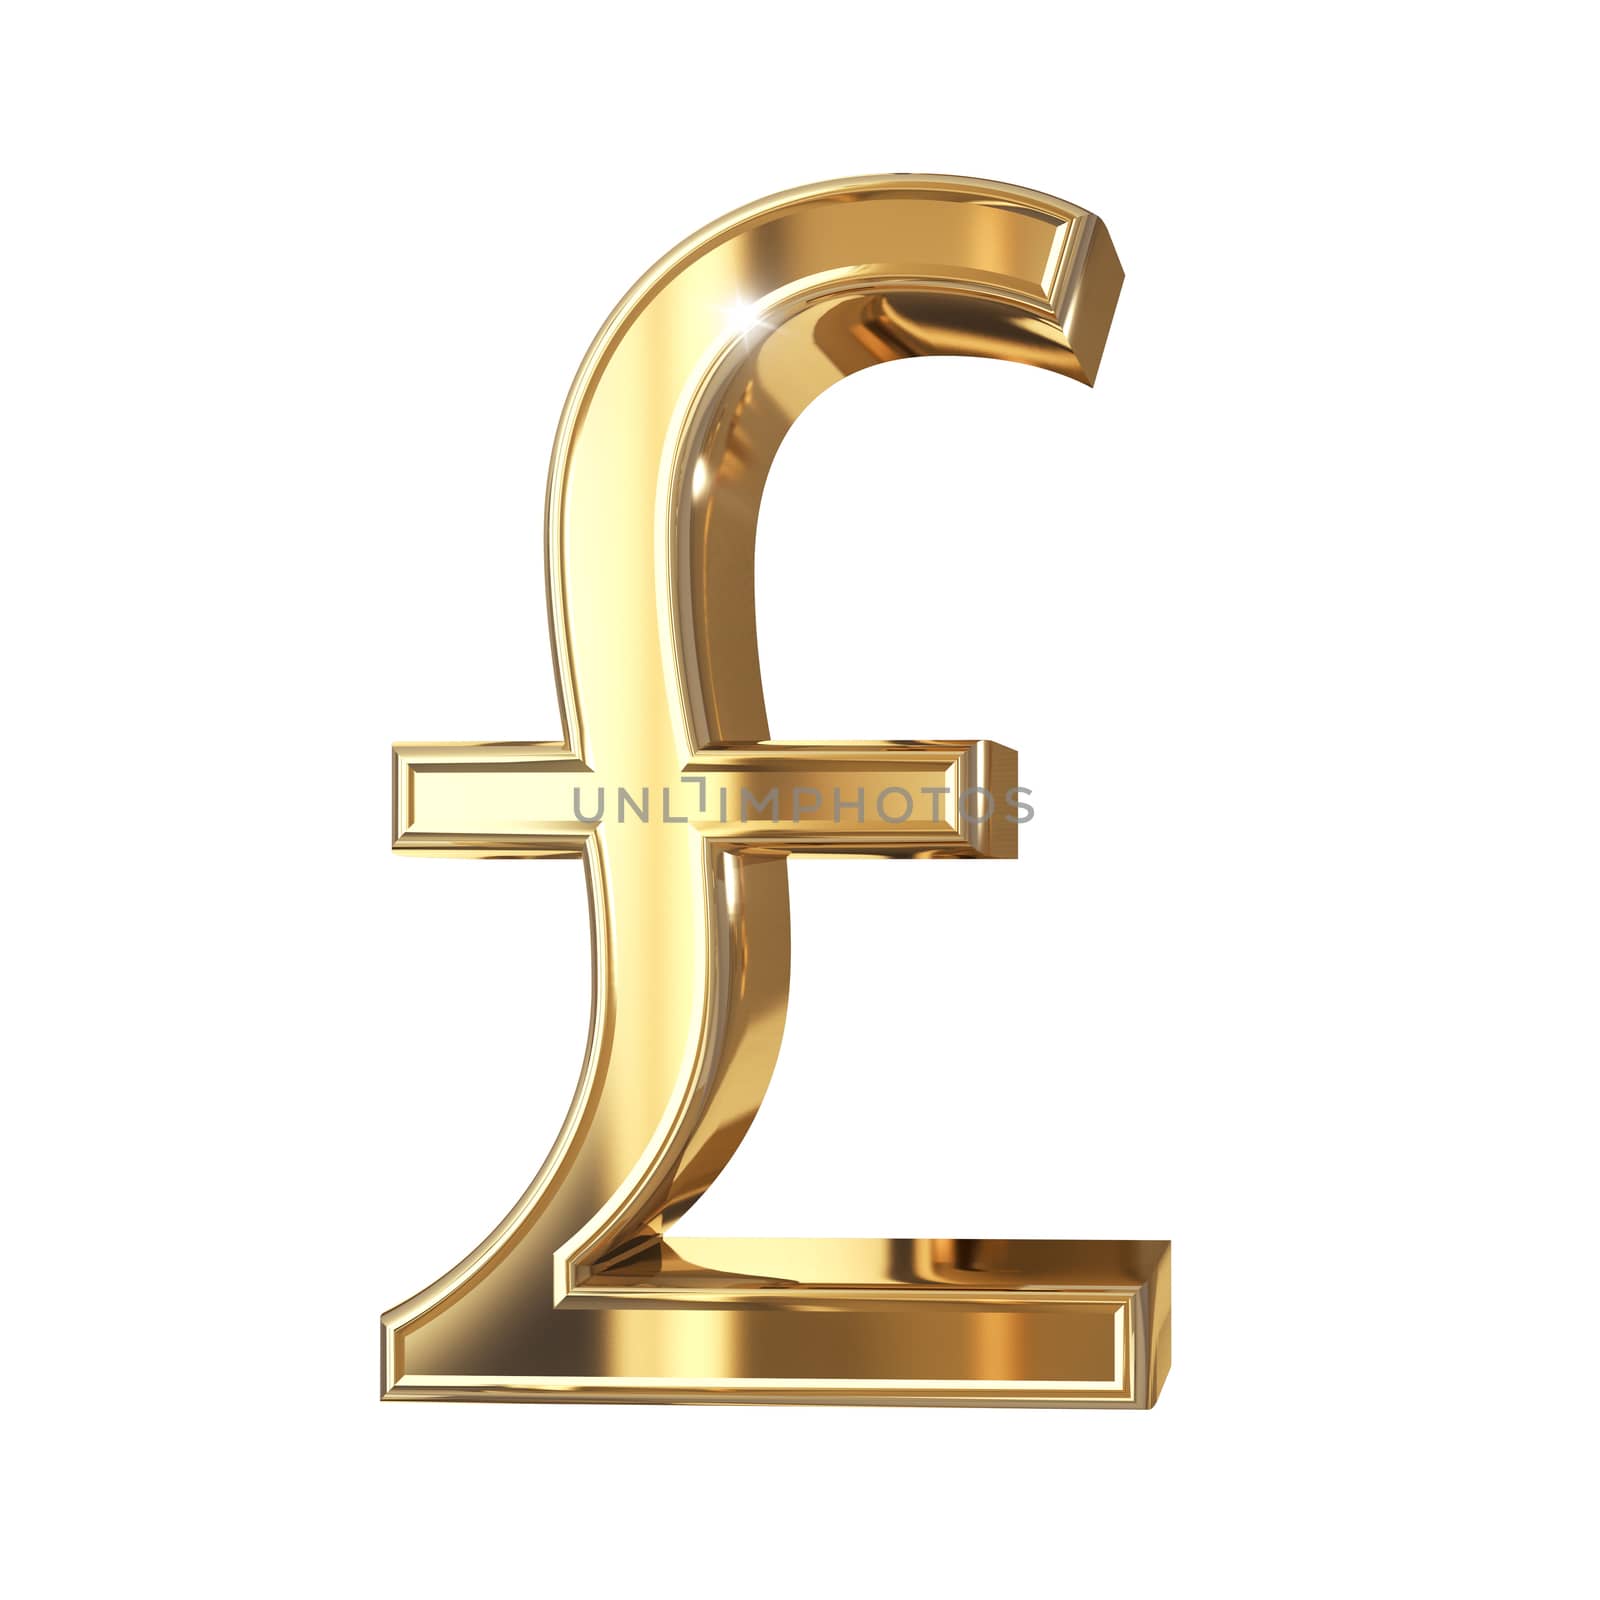 Golden 3D pound symbol with clipping path isolated on white background